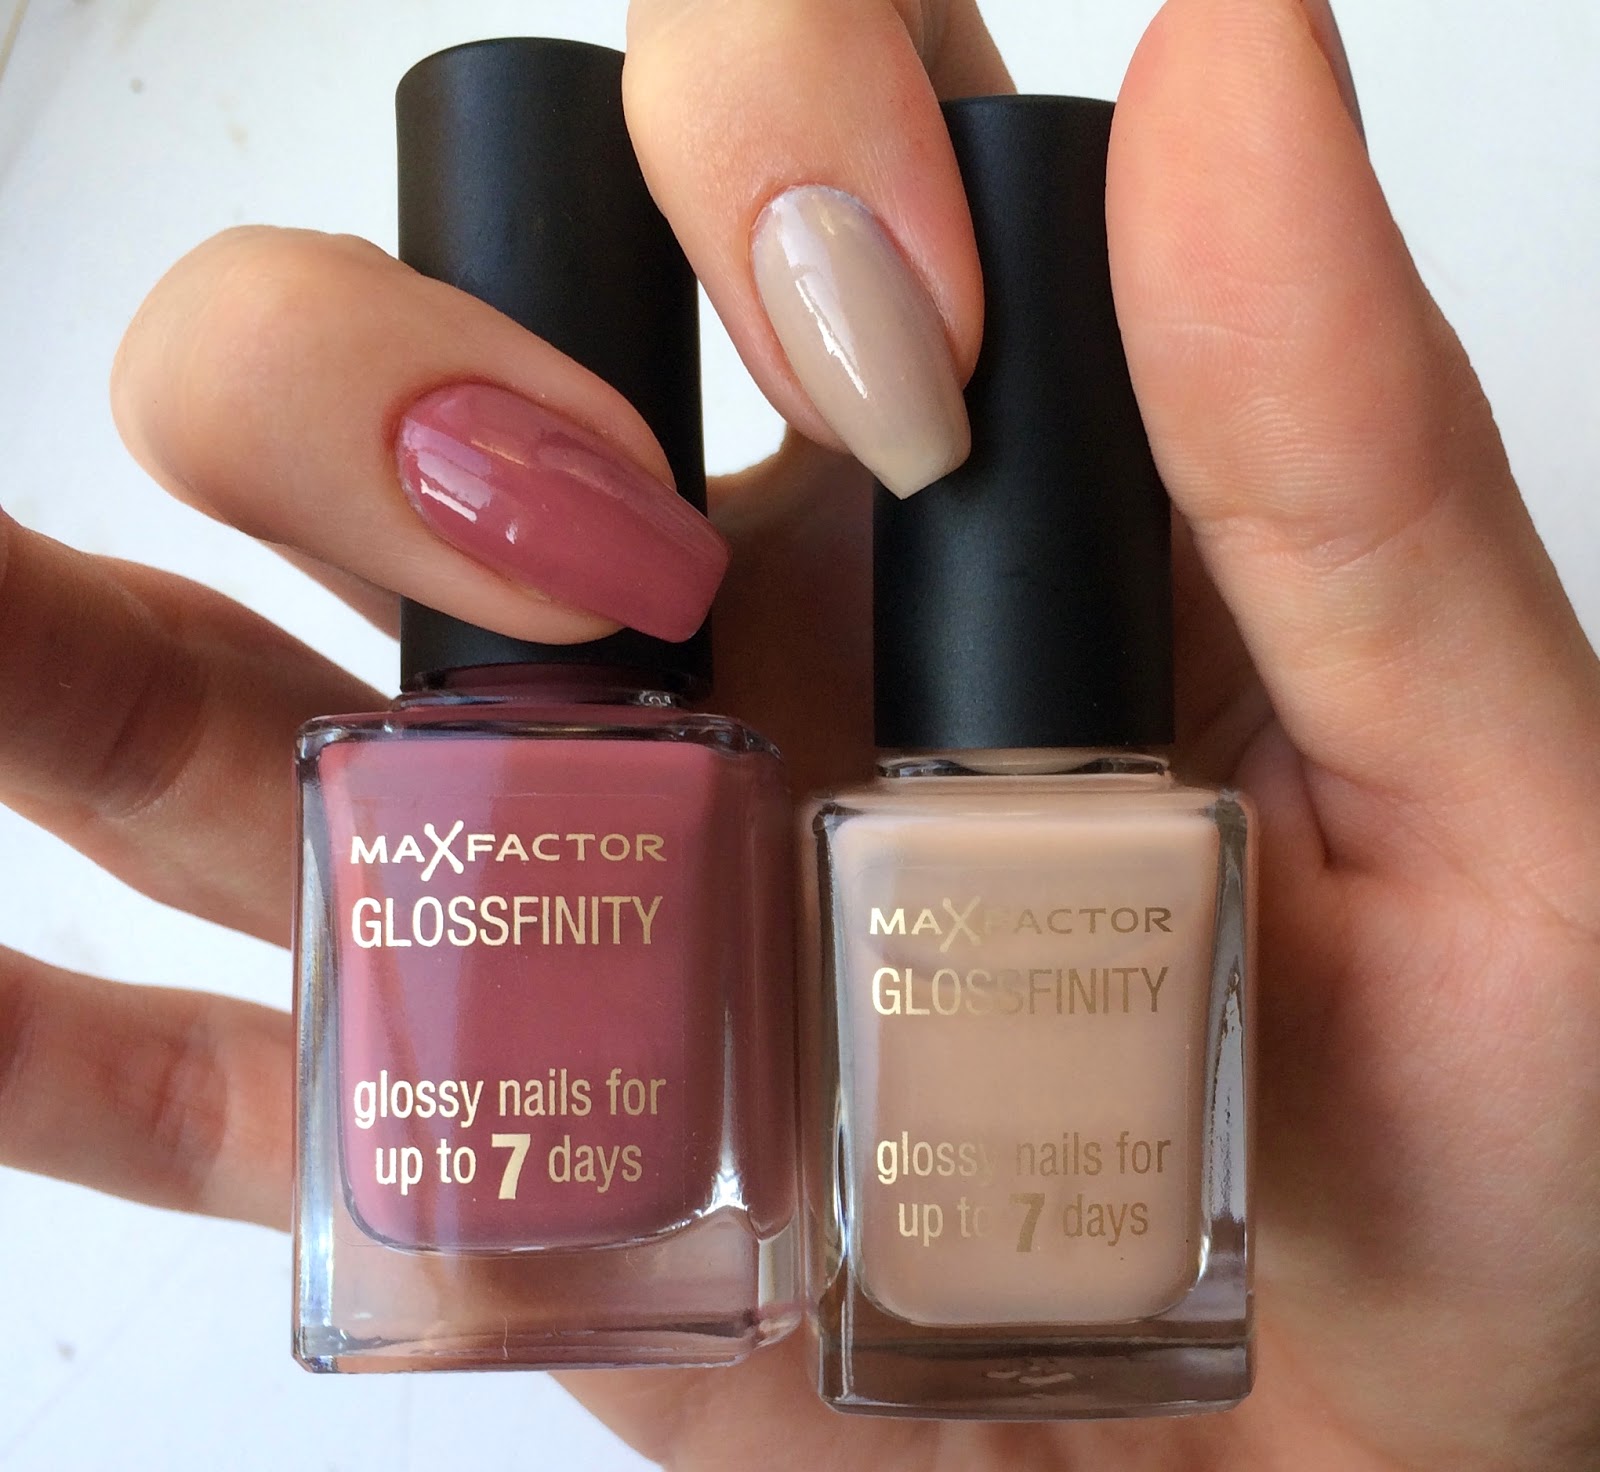 max-factor-glossfinity-candy-rose-desert-sand-on-nails-swatches